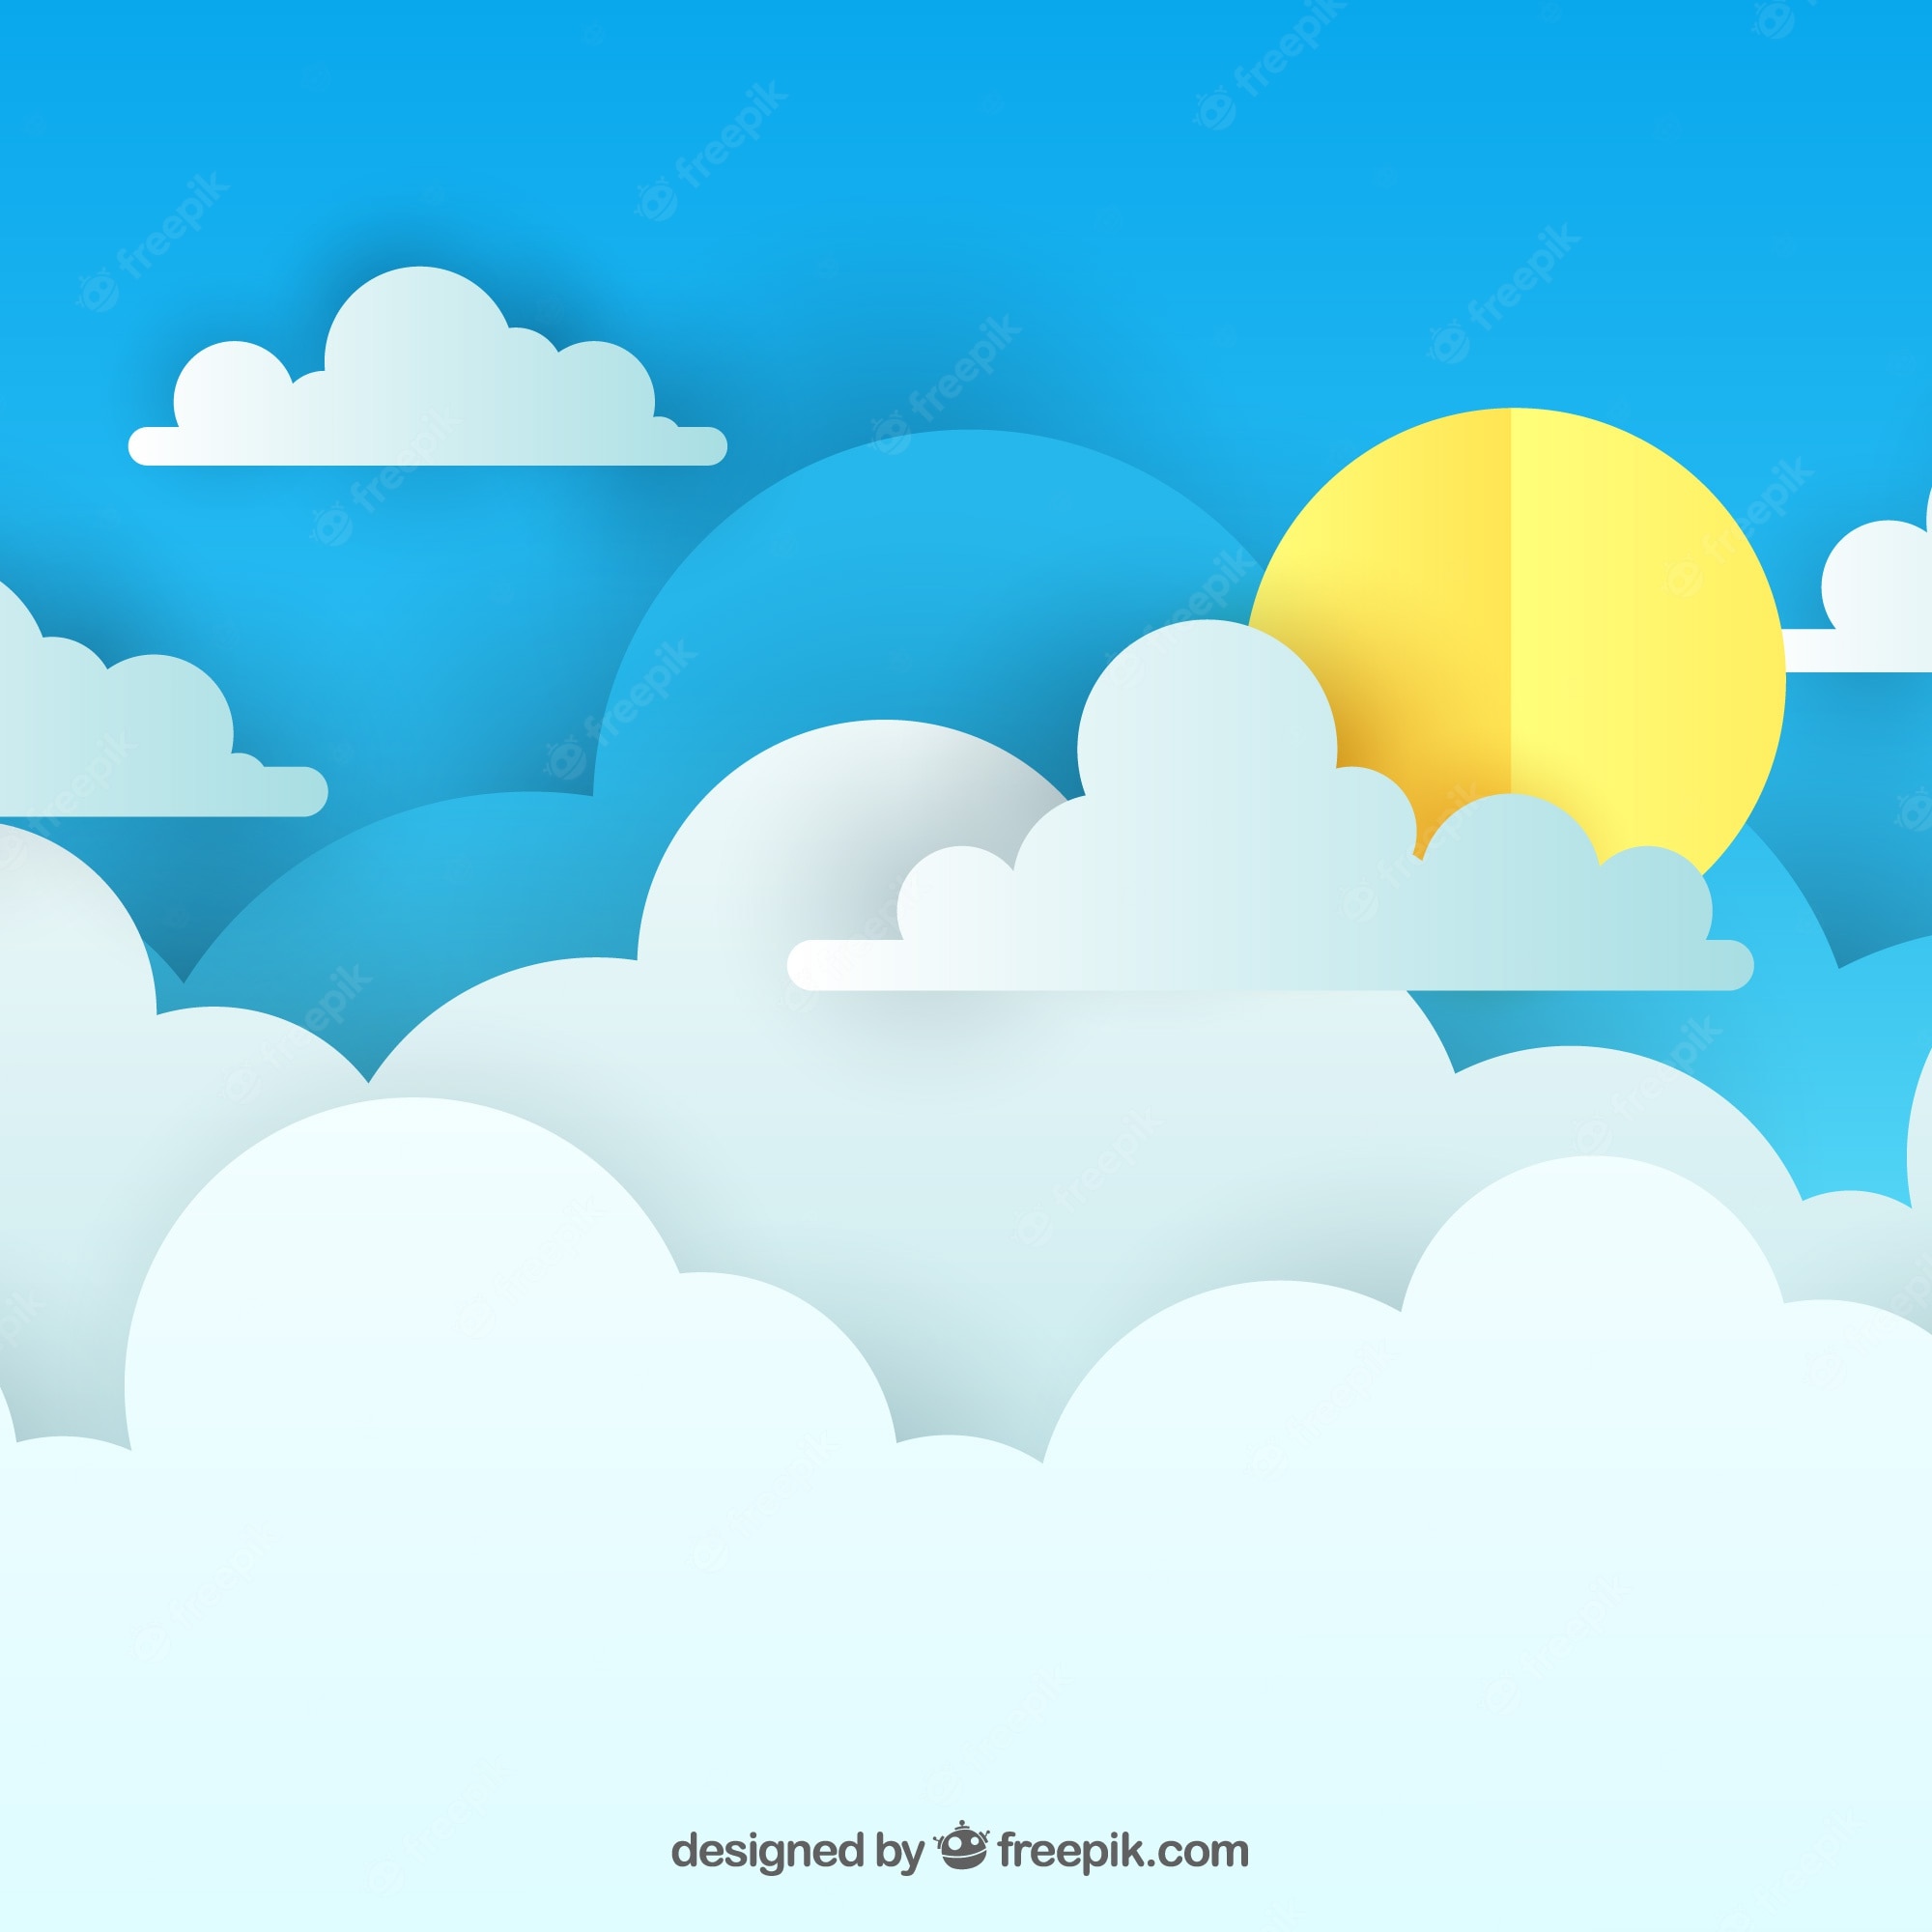 Day Sky Images Wallpapers